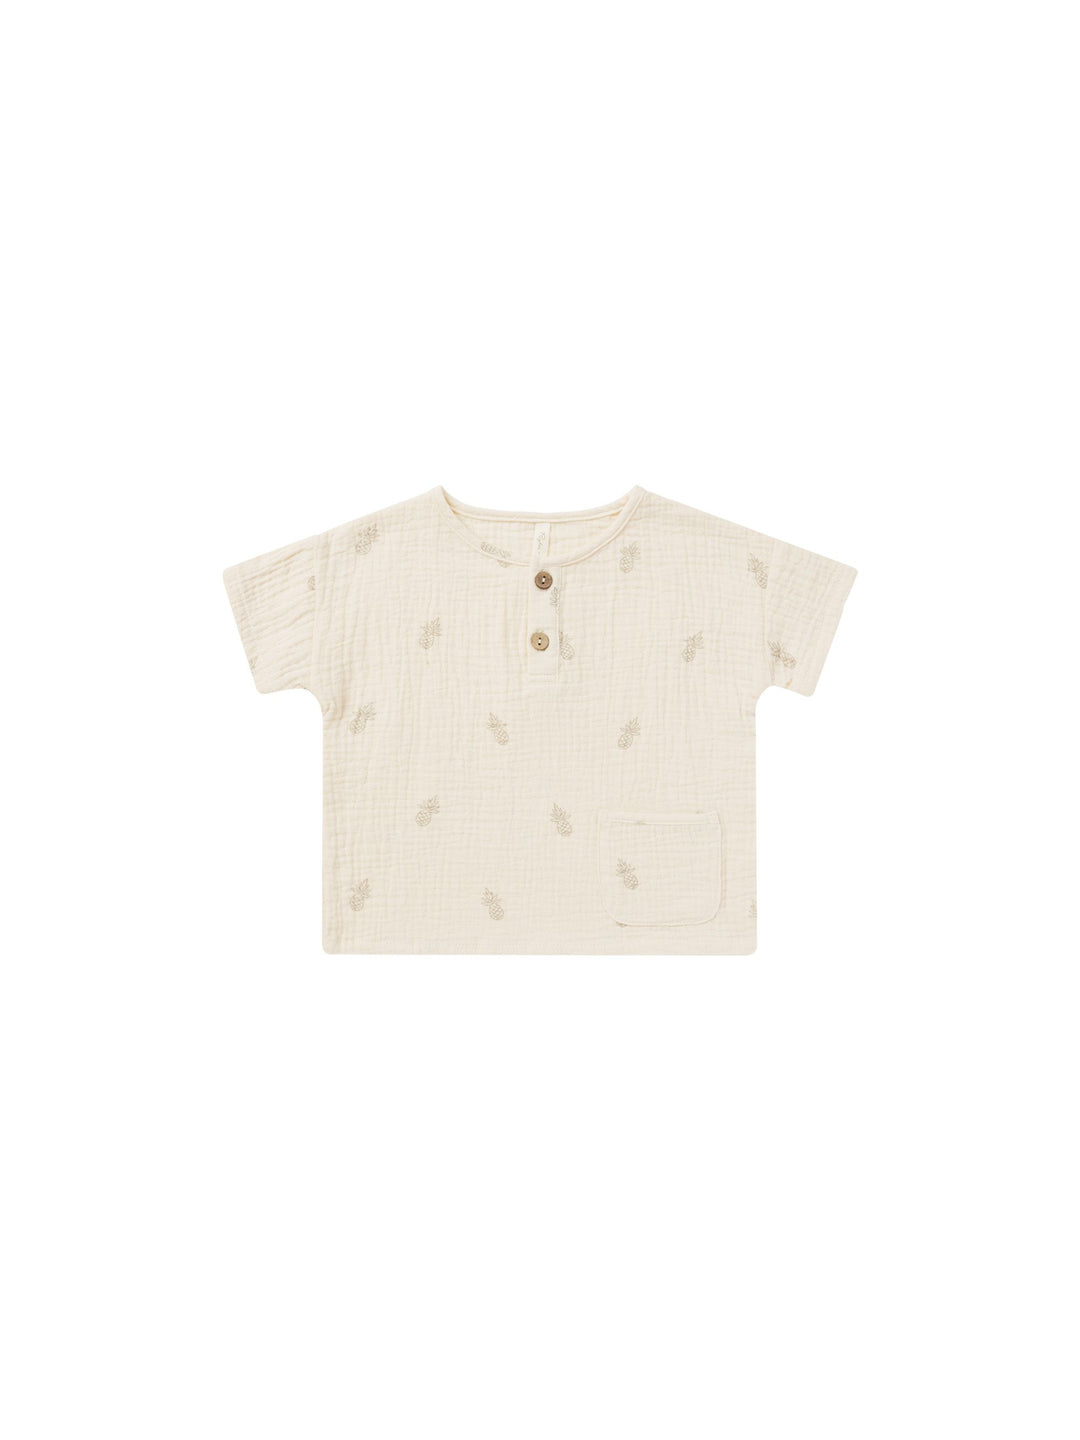 Pineapple Henley Shirt by Rylee and Cru